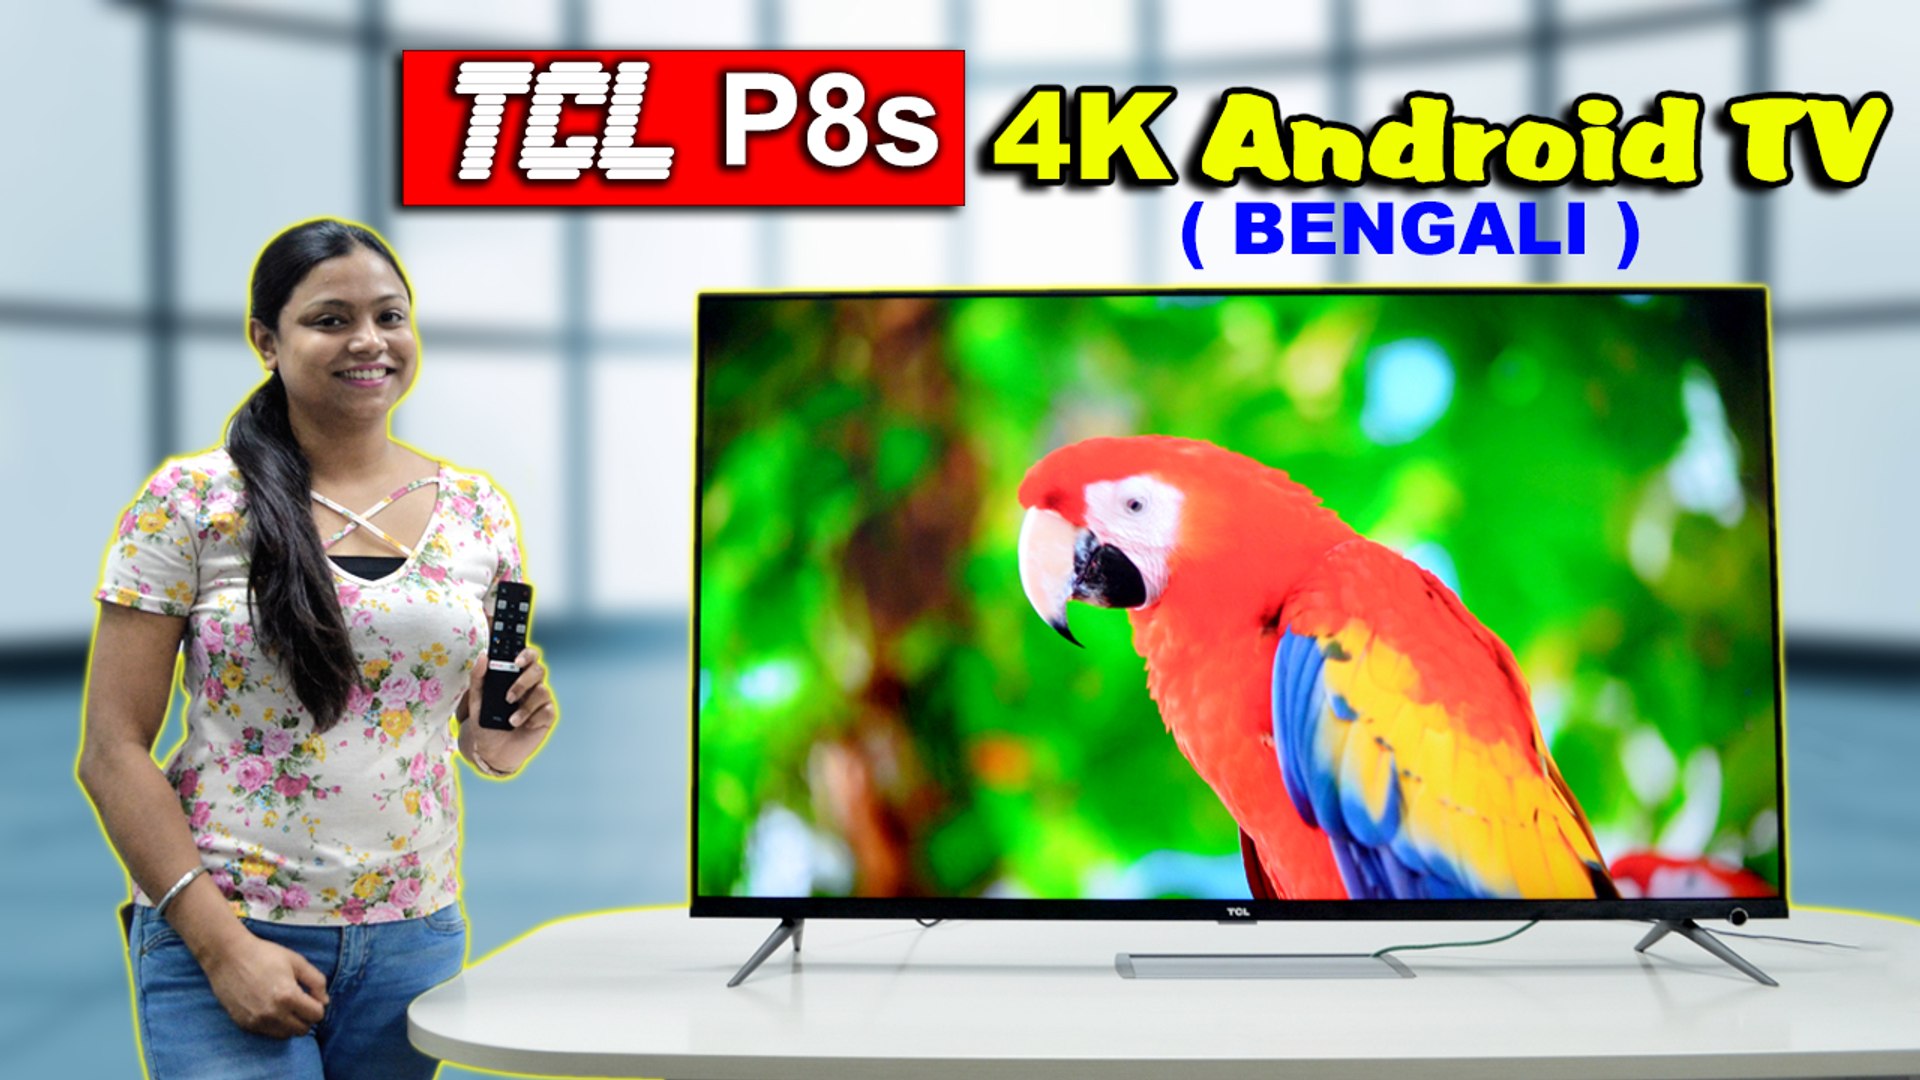 TCL P8S Google Certified AI Enabled TV In Budget Segment (BENGALI) - video  Dailymotion